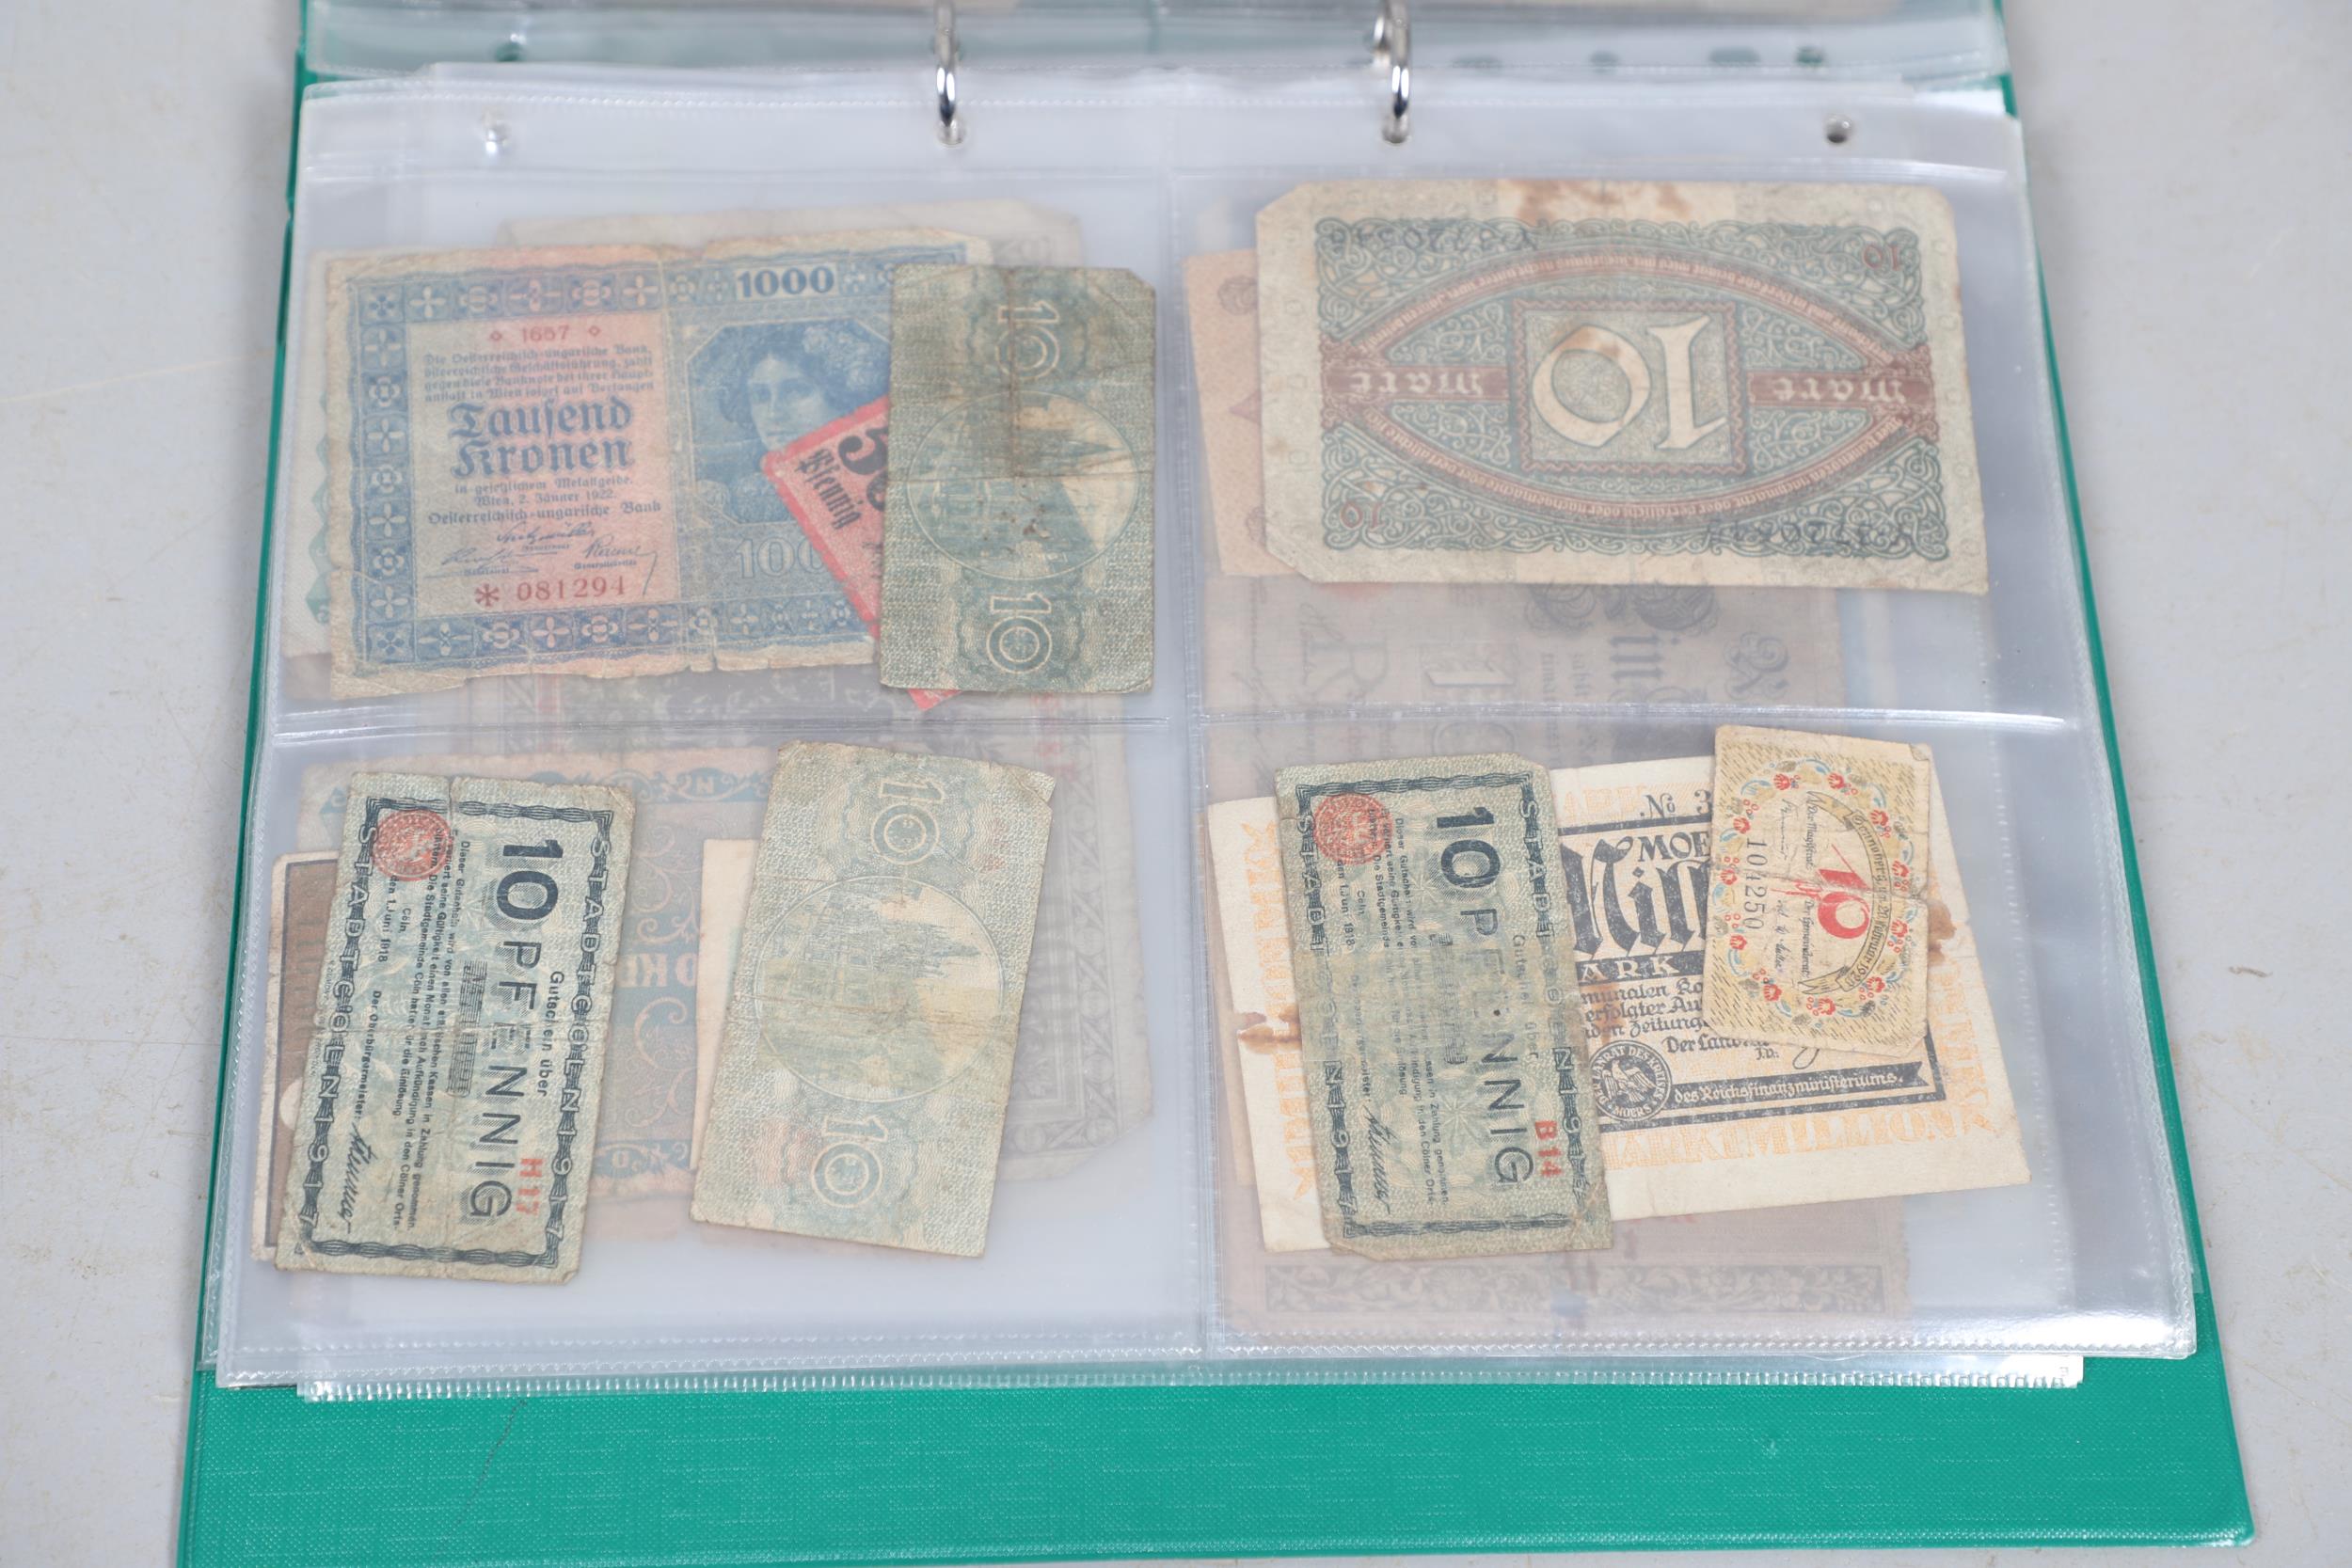 AN EXTENSIVE COLLECTION OF WORLD BANKNOTES. - Image 52 of 56